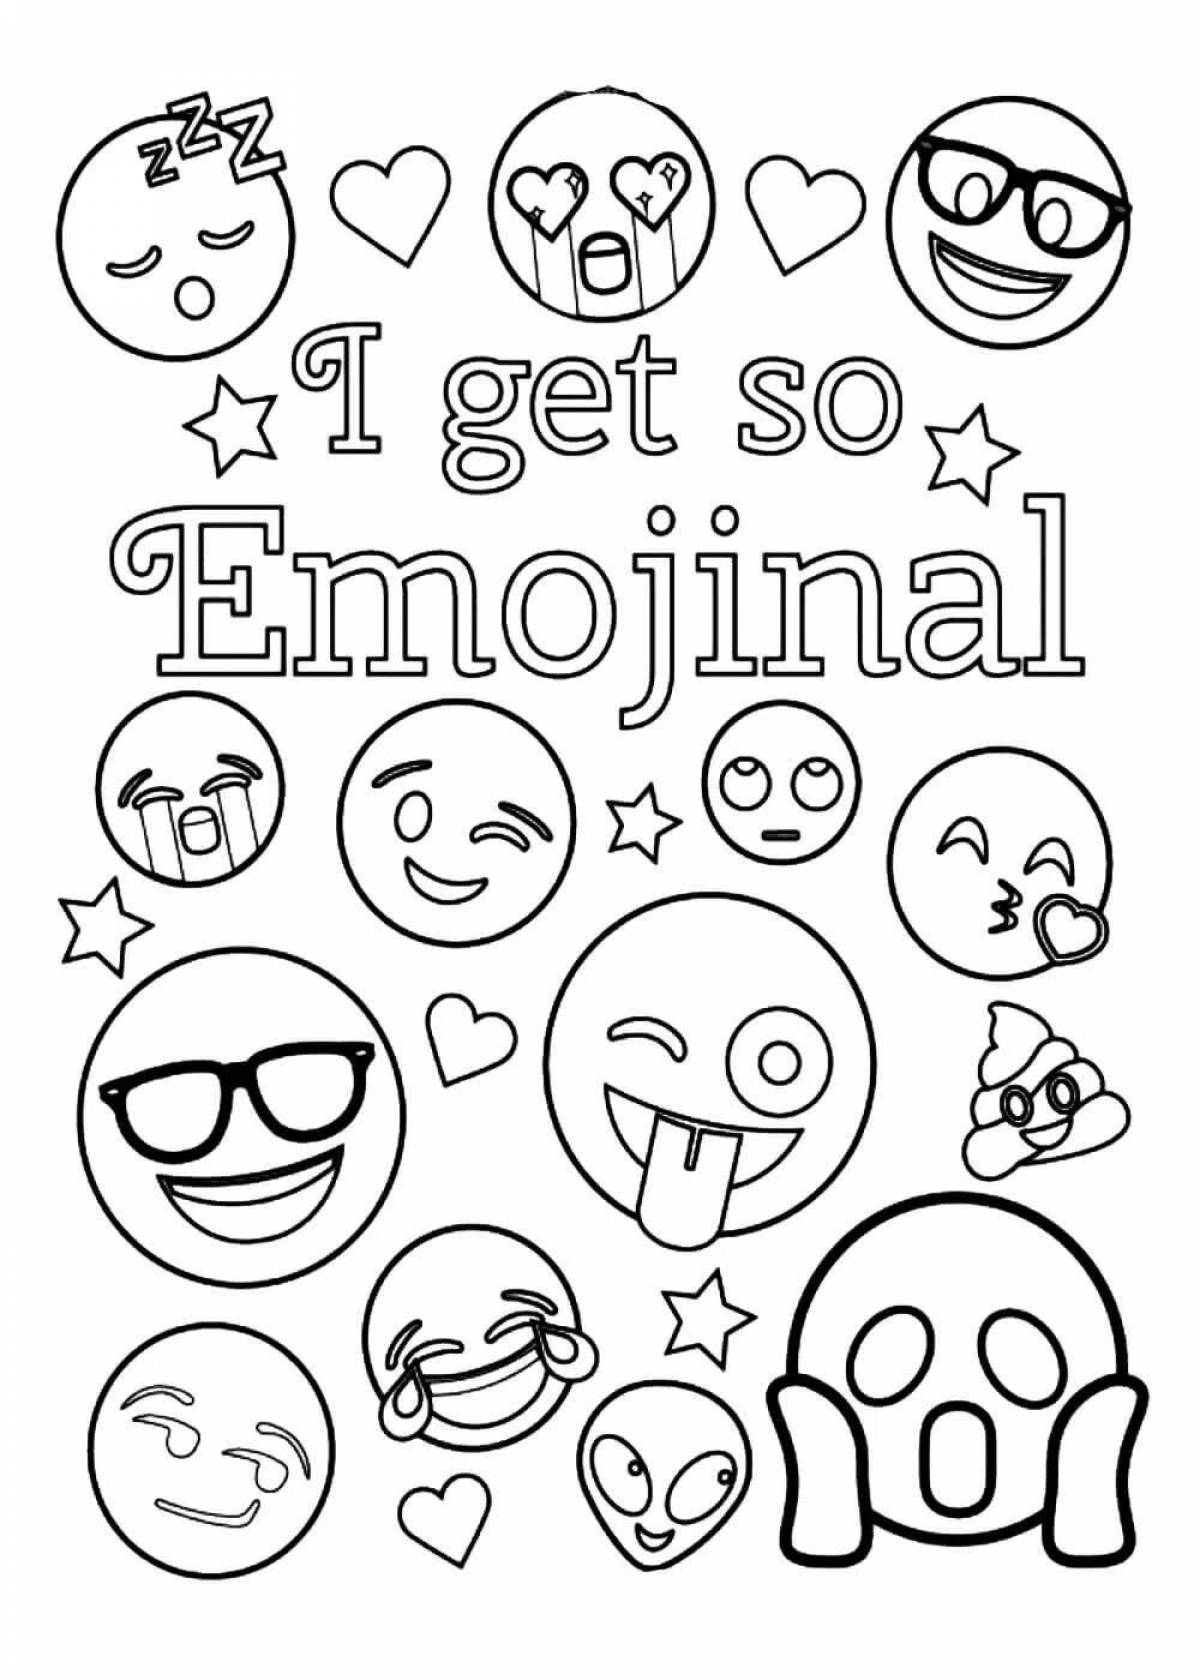 Amazing coloring pages small emoticons for stickers